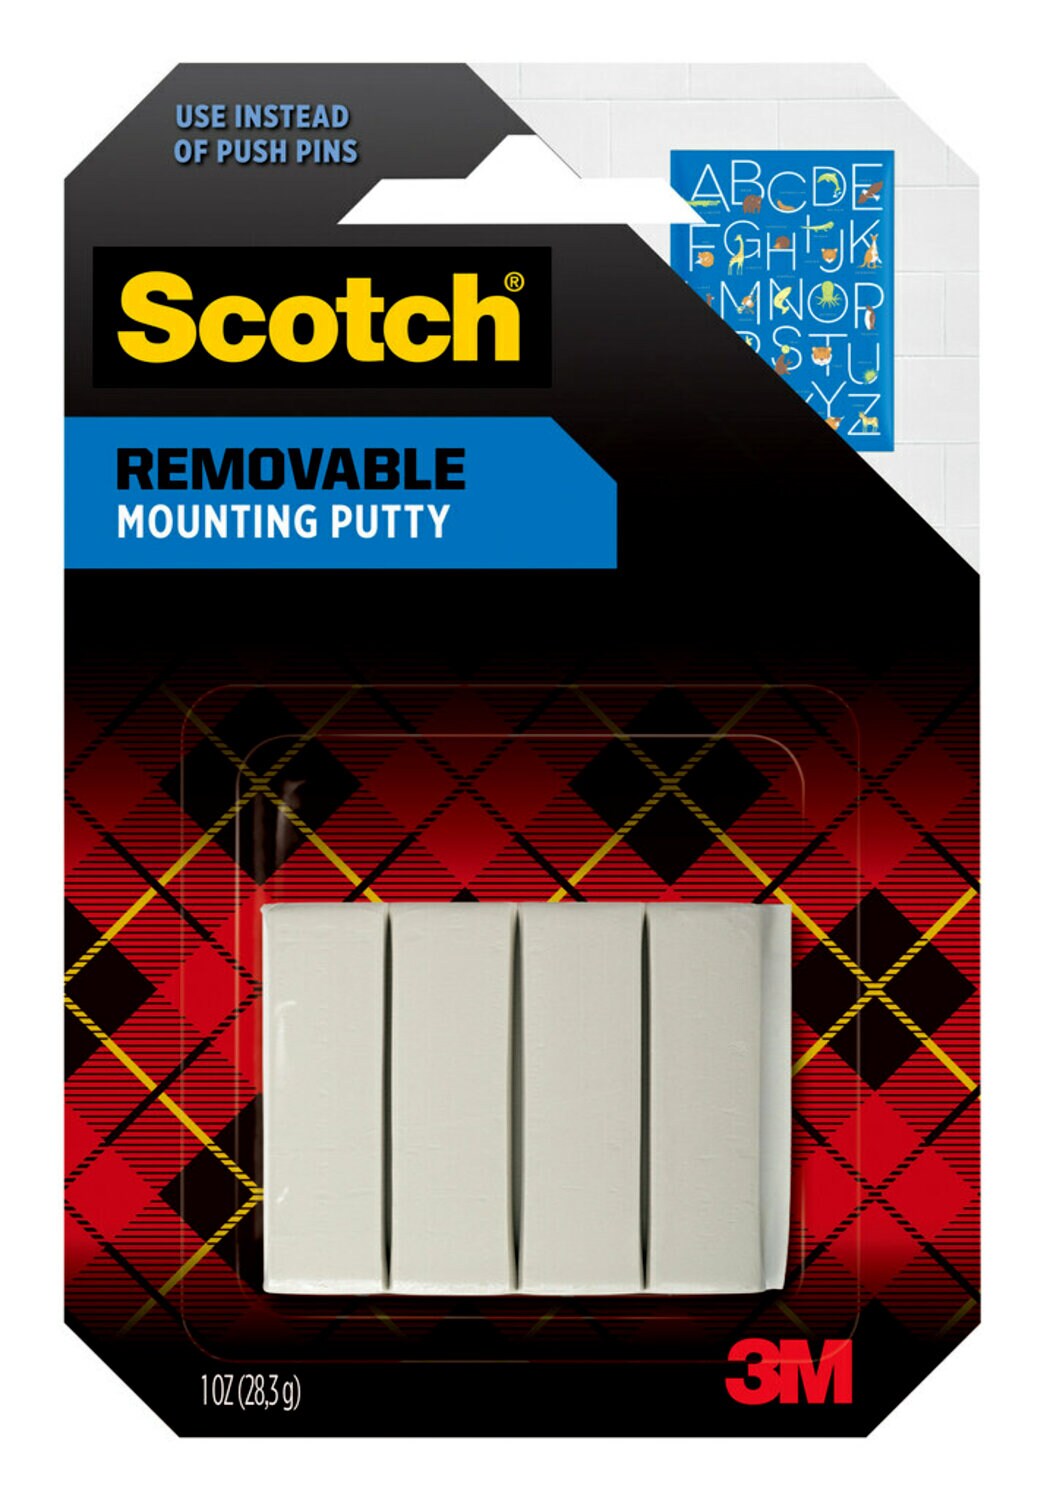 7100245430 - Scotch Removable Mounting Putty 861S, 1 oz. White